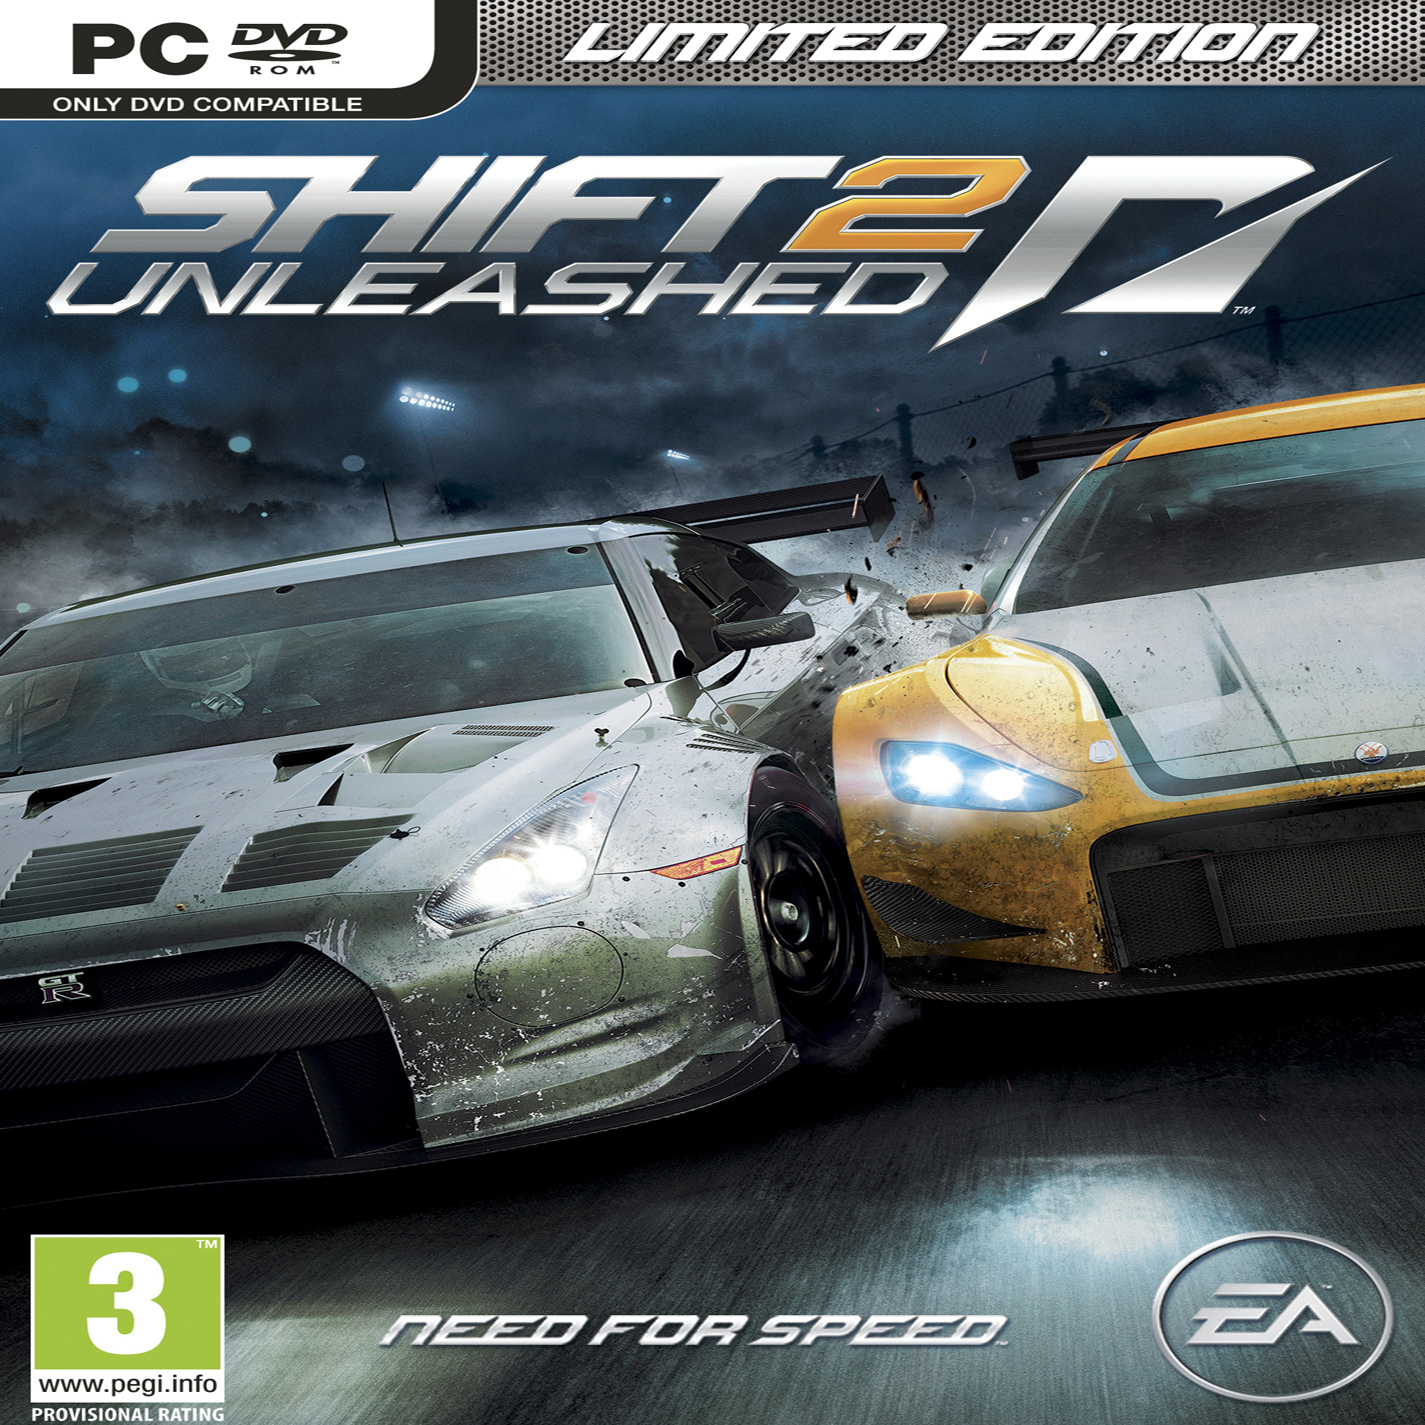 Need for Speed Shift 2: Unleashed - predn CD obal 2